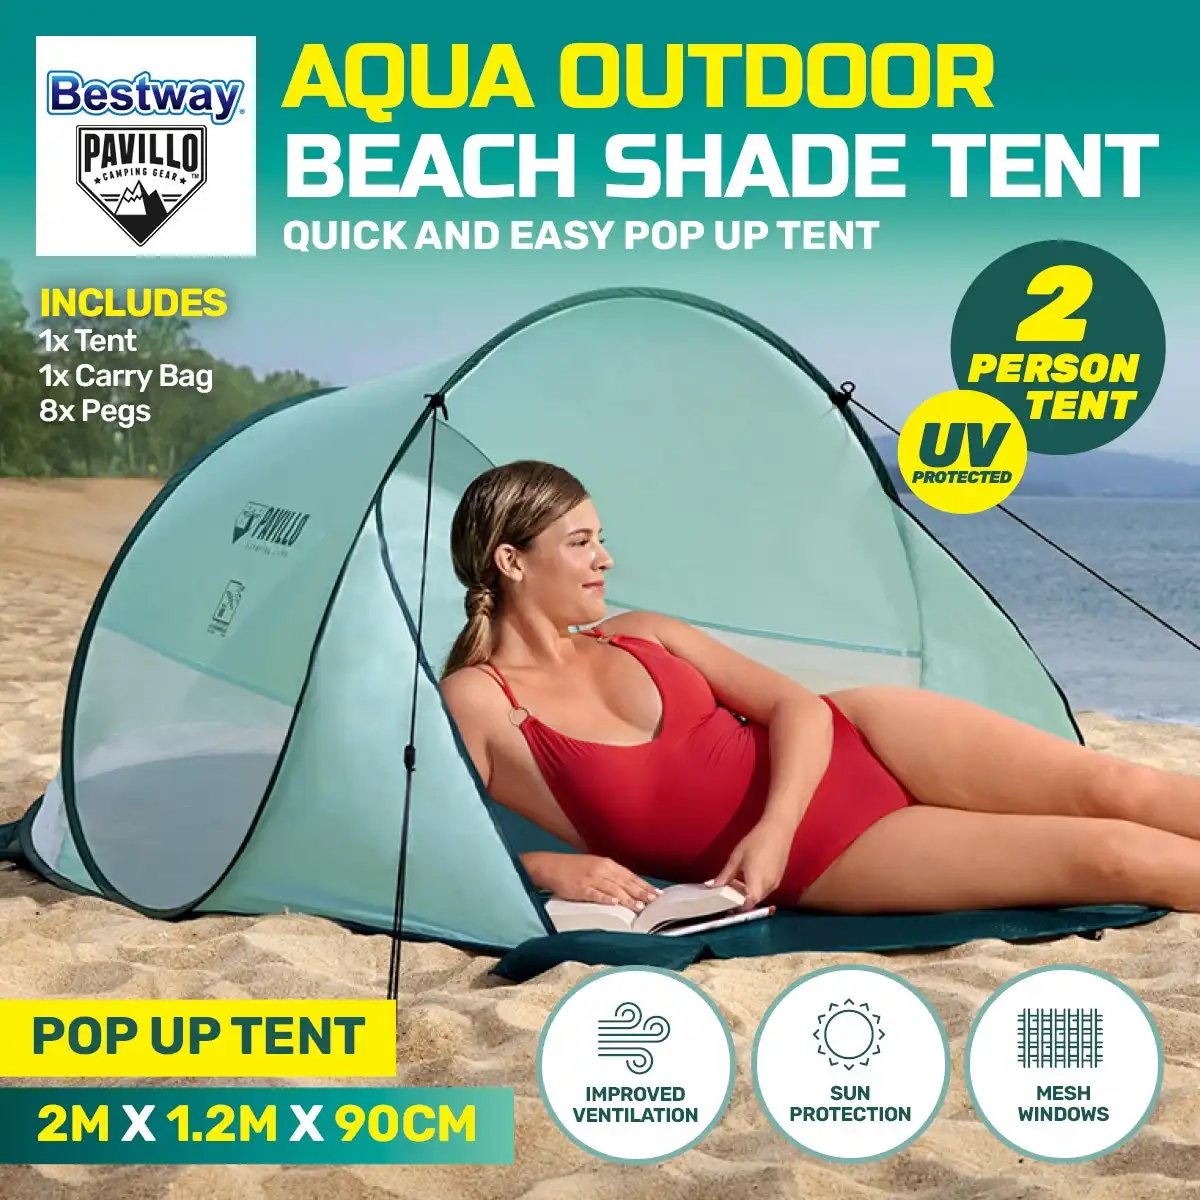 Bestway® 2m x 1.2m Beach Tent 2 Person UV Protected Pegs & Carry Bag Included